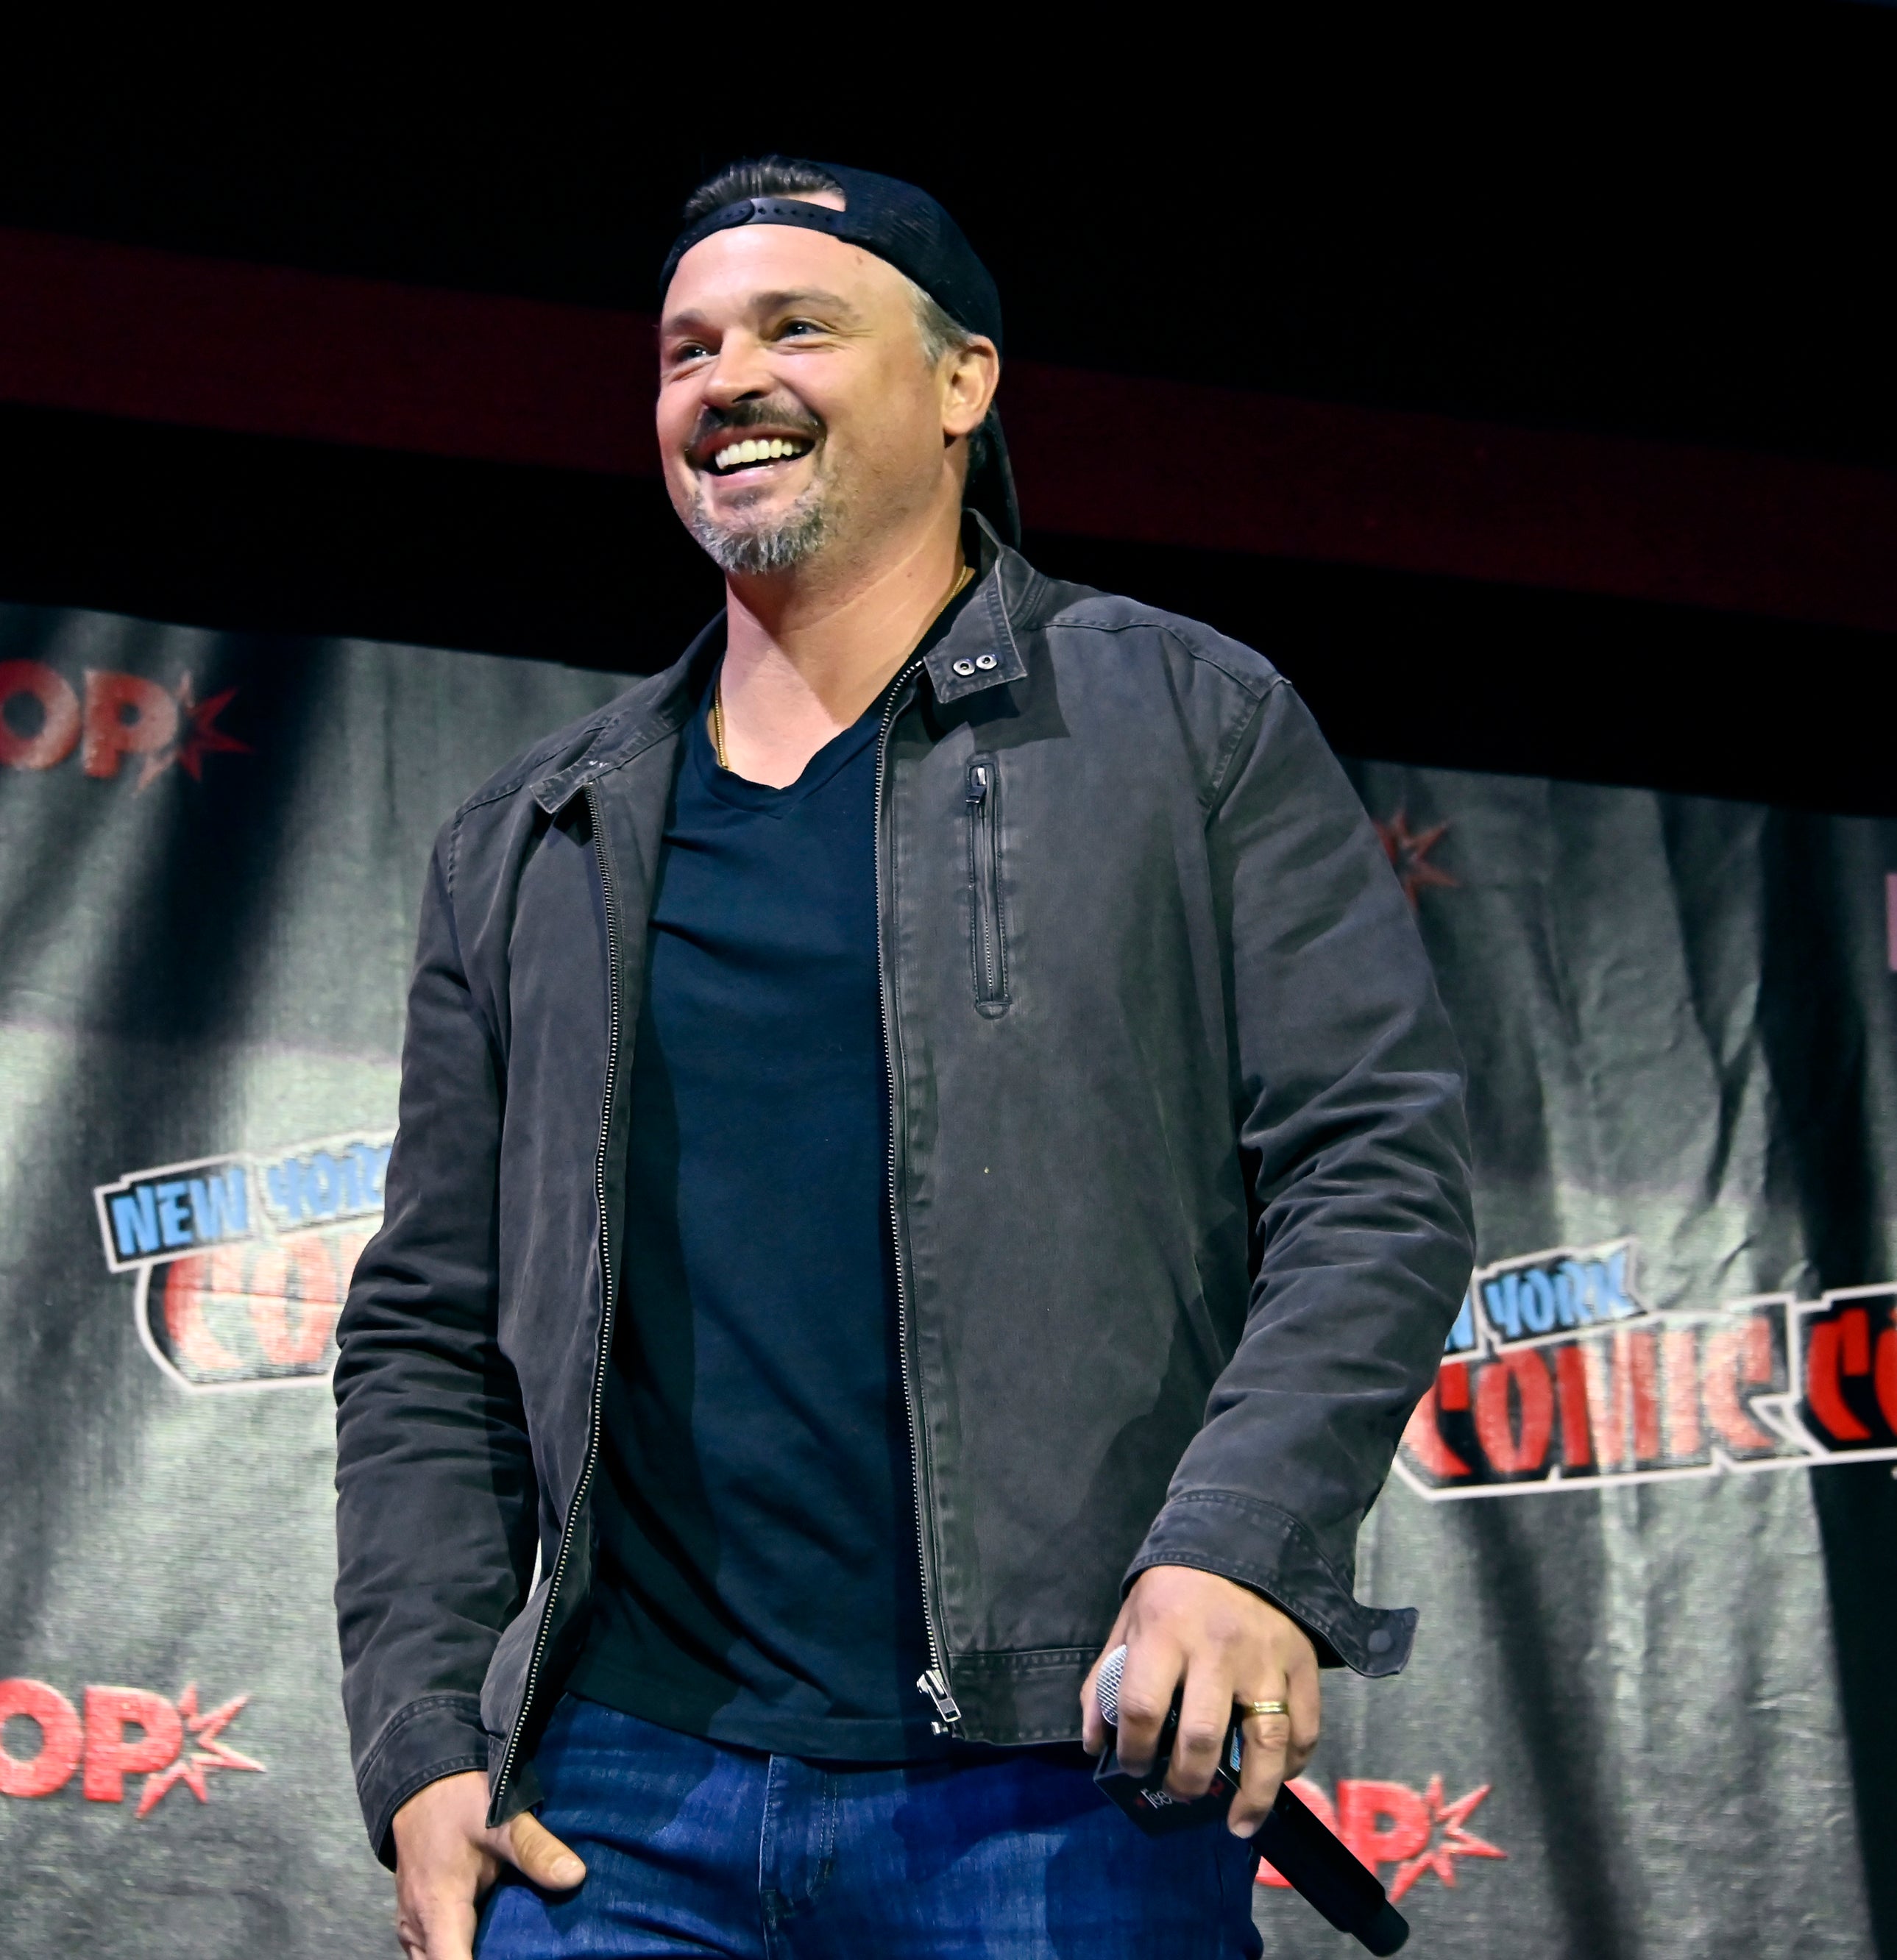 Man smiling on stage at New York Comic Con, wearing a headband, t-shirt, and jacket